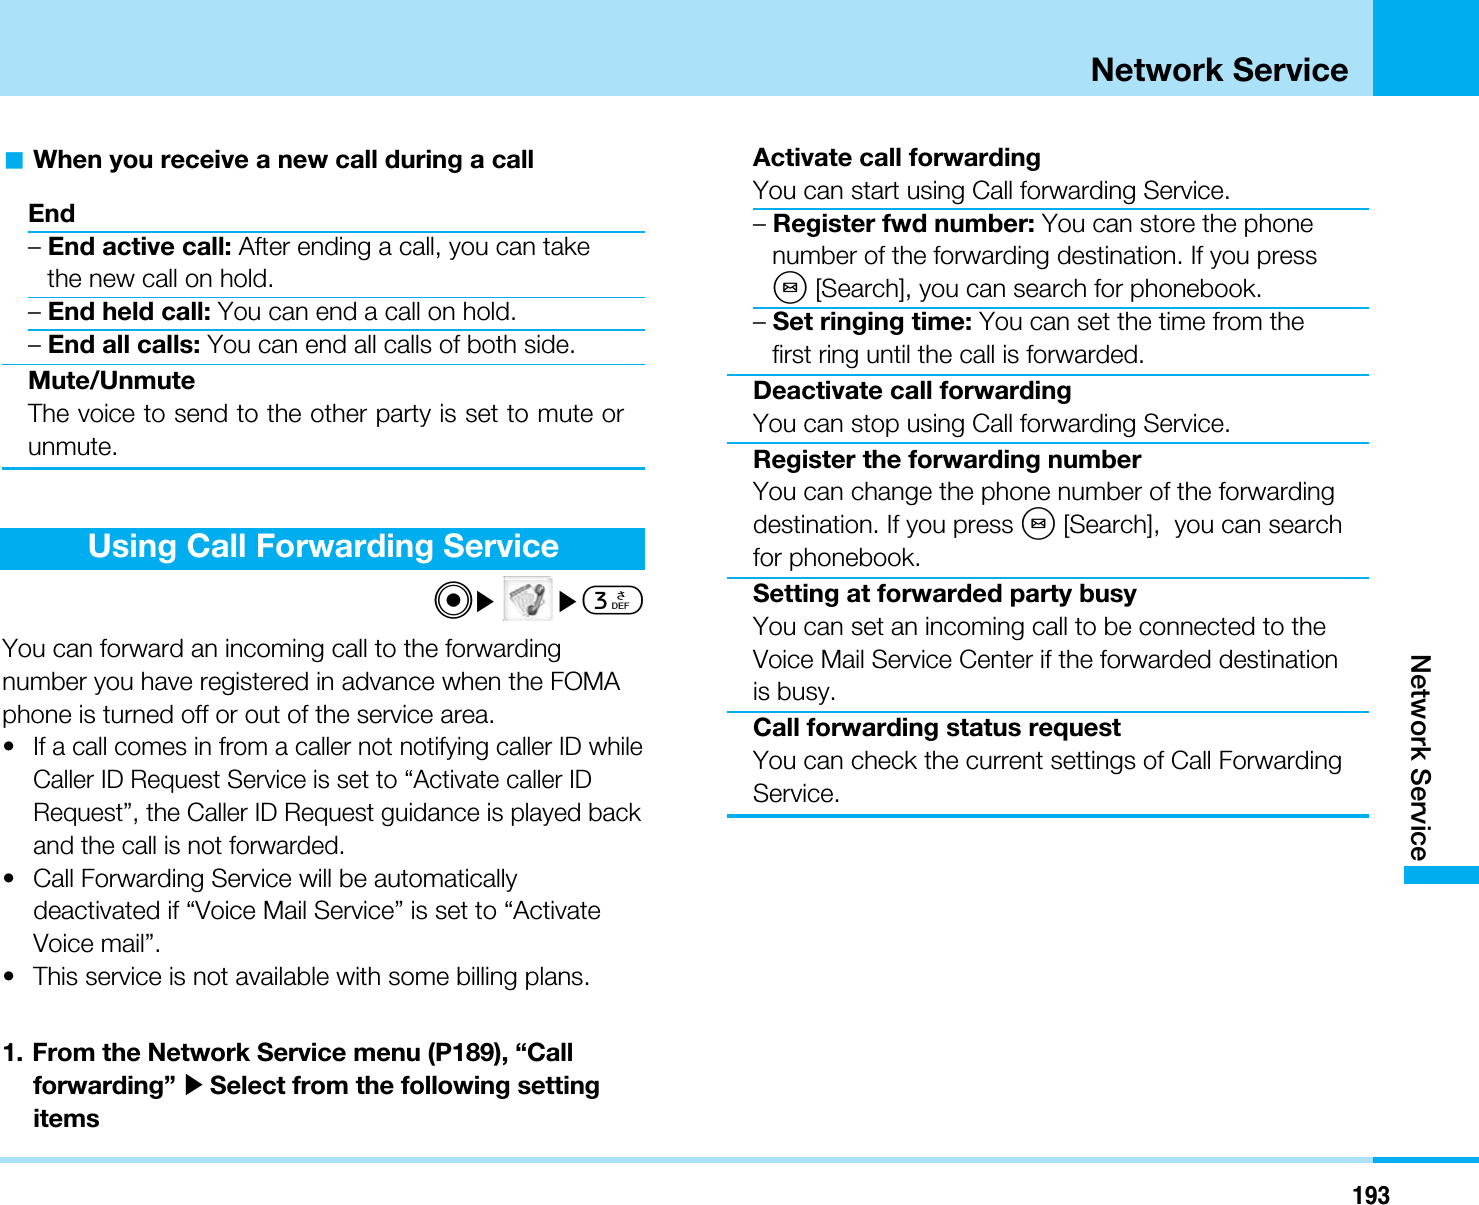 193Network ServiceNetwork ServiceaWhen you receive a new call during a callEnd–End active call: After ending a call, you can takethe new call on hold.–End held call: You can end a call on hold.–End all calls: You can end all calls of both side.Mute/UnmuteThe voice to send to the other party is set to mute orunmute.Using Call Forwarding ServiceC]]3You can forward an incoming call to the forwardingnumber you have registered in advance when the FOMAphone is turned off or out of the service area.•If a call comes in from a caller not notifying caller ID whileCaller ID Request Service is set to “Activate caller IDRequest”, the Caller ID Request guidance is played backand the call is not forwarded.• Call Forwarding Service will be automaticallydeactivated if “Voice Mail Service” is set to “ActivateVoice mail”.• This service is not available with some billing plans.1. From the Network Service menu (P189), “Callforwarding” ]Select from the following settingitemsActivate call forwardingYou can start using Call forwarding Service.–Register fwd number: You can store the phonenumber of the forwarding destination. If you pressM[Search], you can search for phonebook.–Set ringing time: You can set the time from thefirst ring until the call is forwarded.Deactivate call forwardingYou can stop using Call forwarding Service.Register the forwarding numberYou can change the phone number of the forwardingdestination. If you press M[Search],  you can searchfor phonebook.Setting at forwarded party busyYou can set an incoming call to be connected to theVoice Mail Service Center if the forwarded destinationis busy.Call forwarding status requestYou can check the current settings of Call ForwardingService.